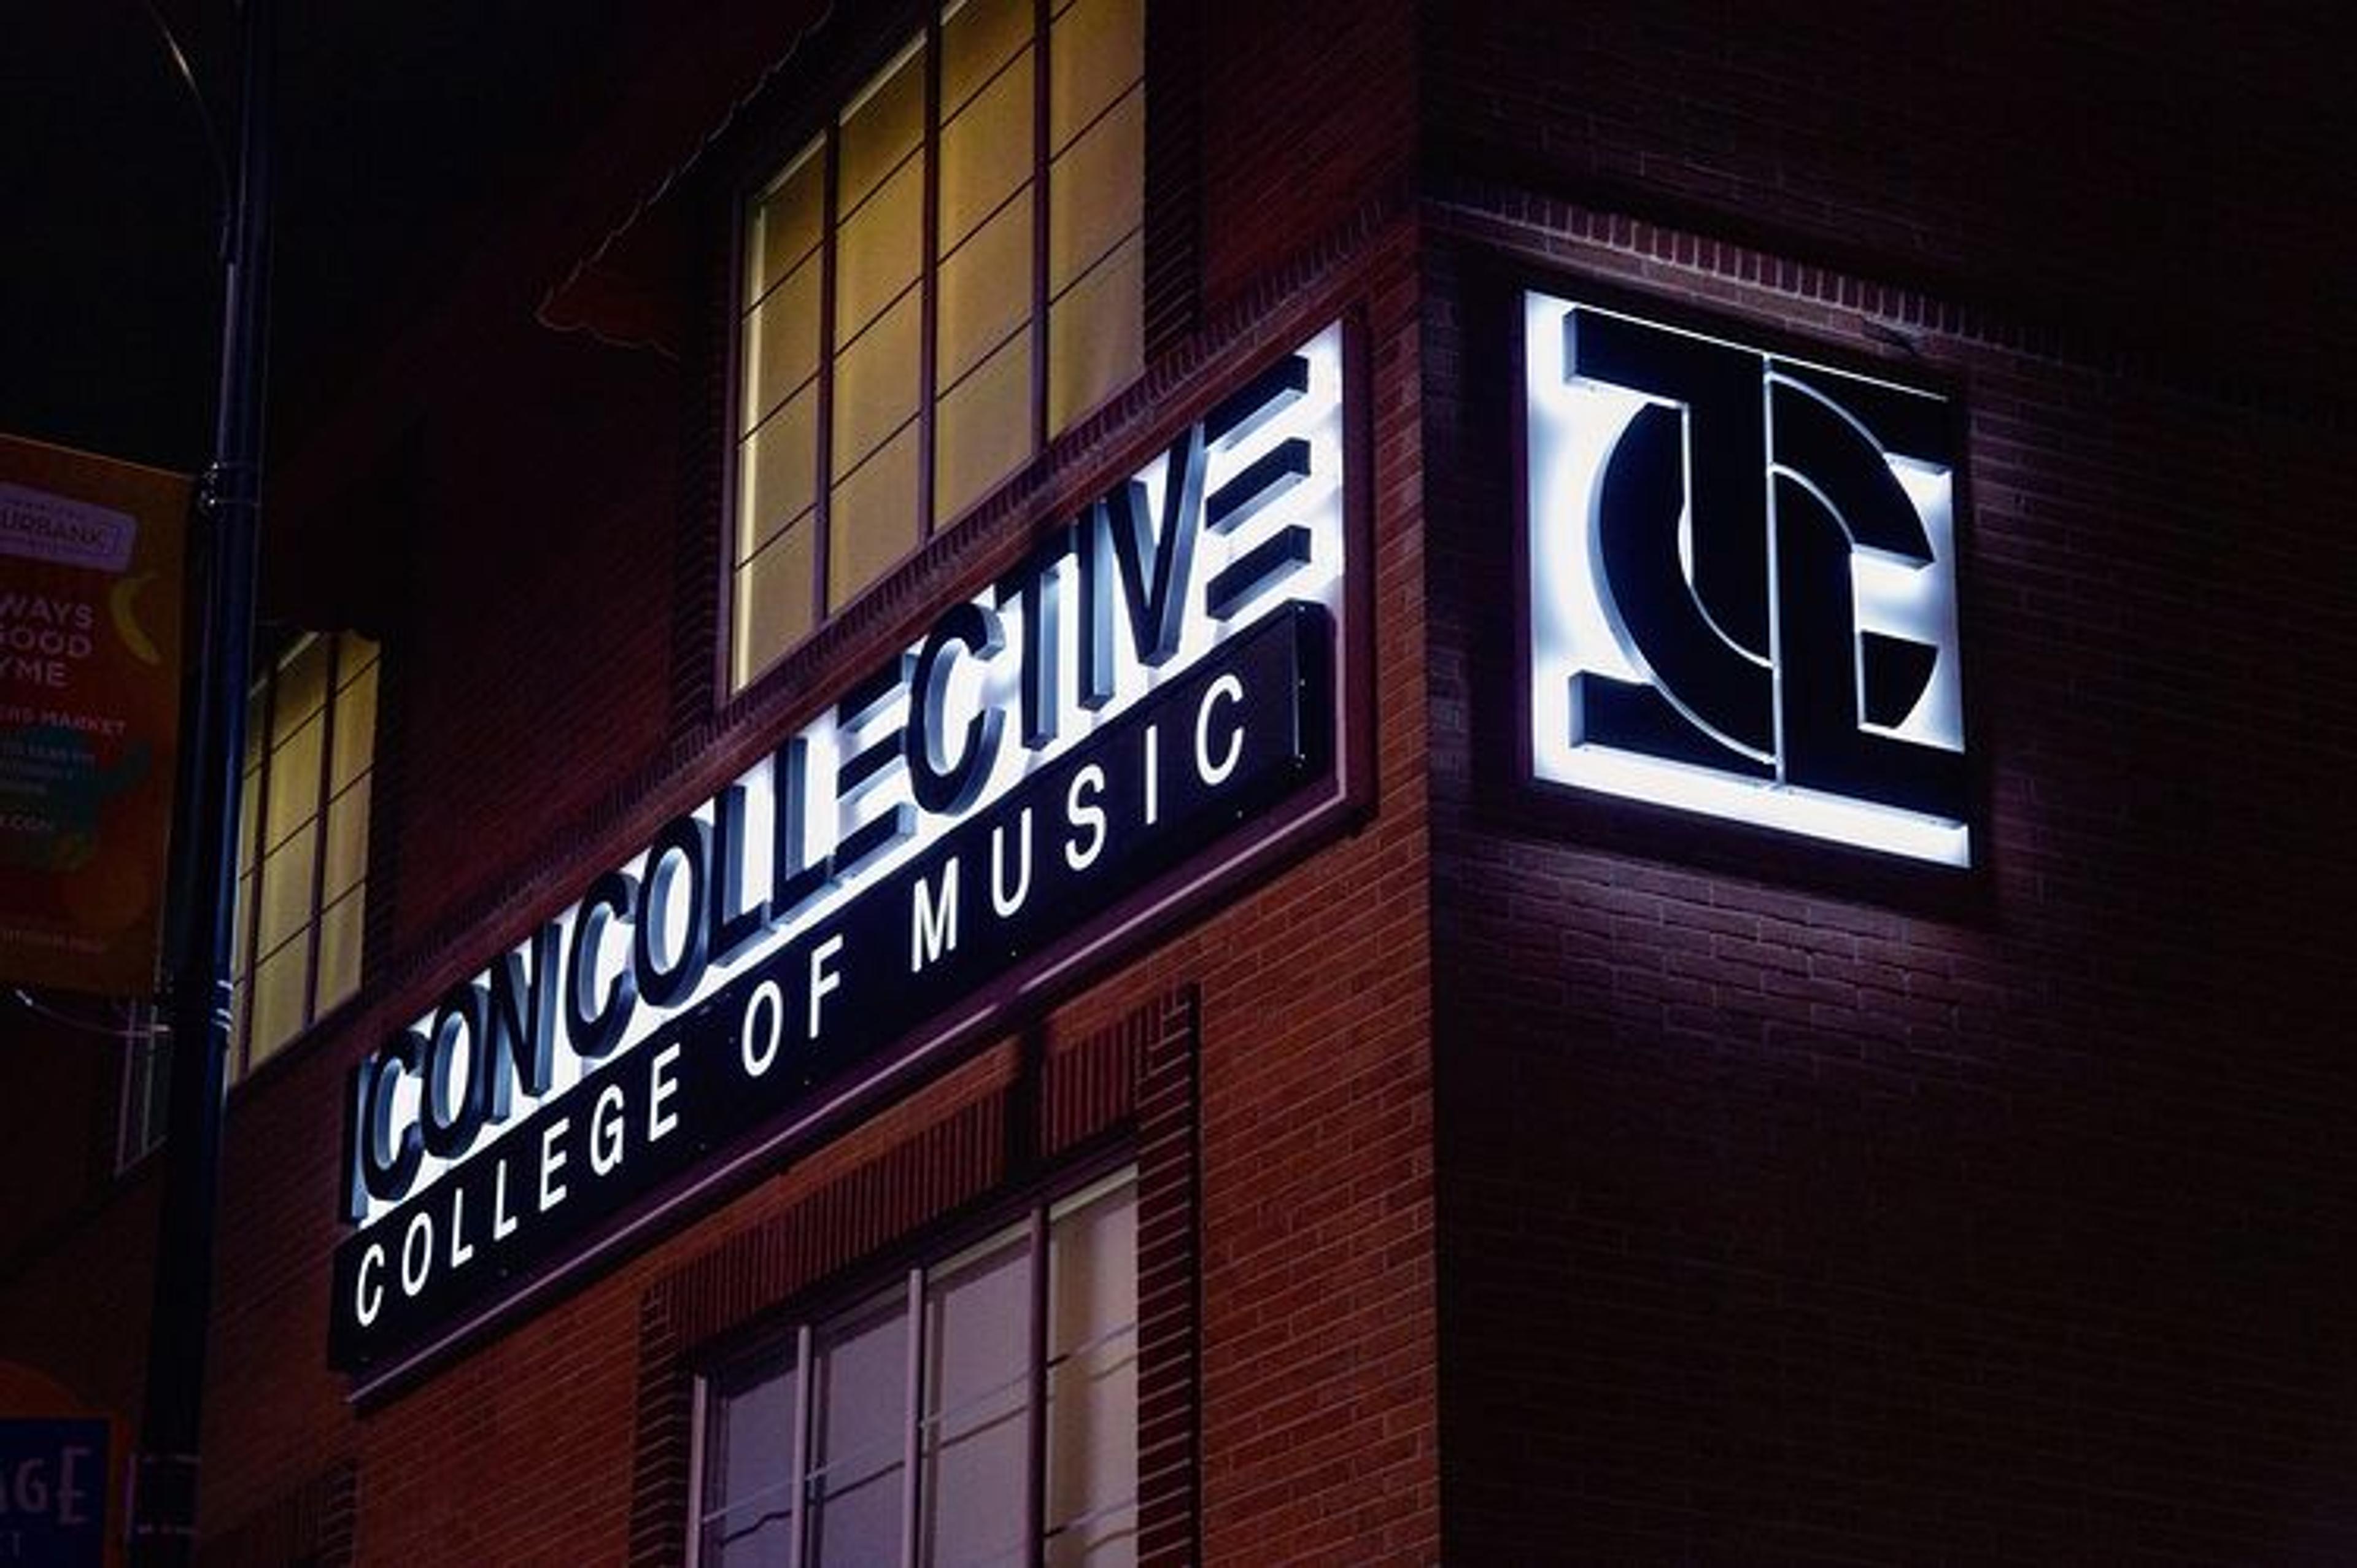 A photograph of the Icon Collective College of Music building exterior at night